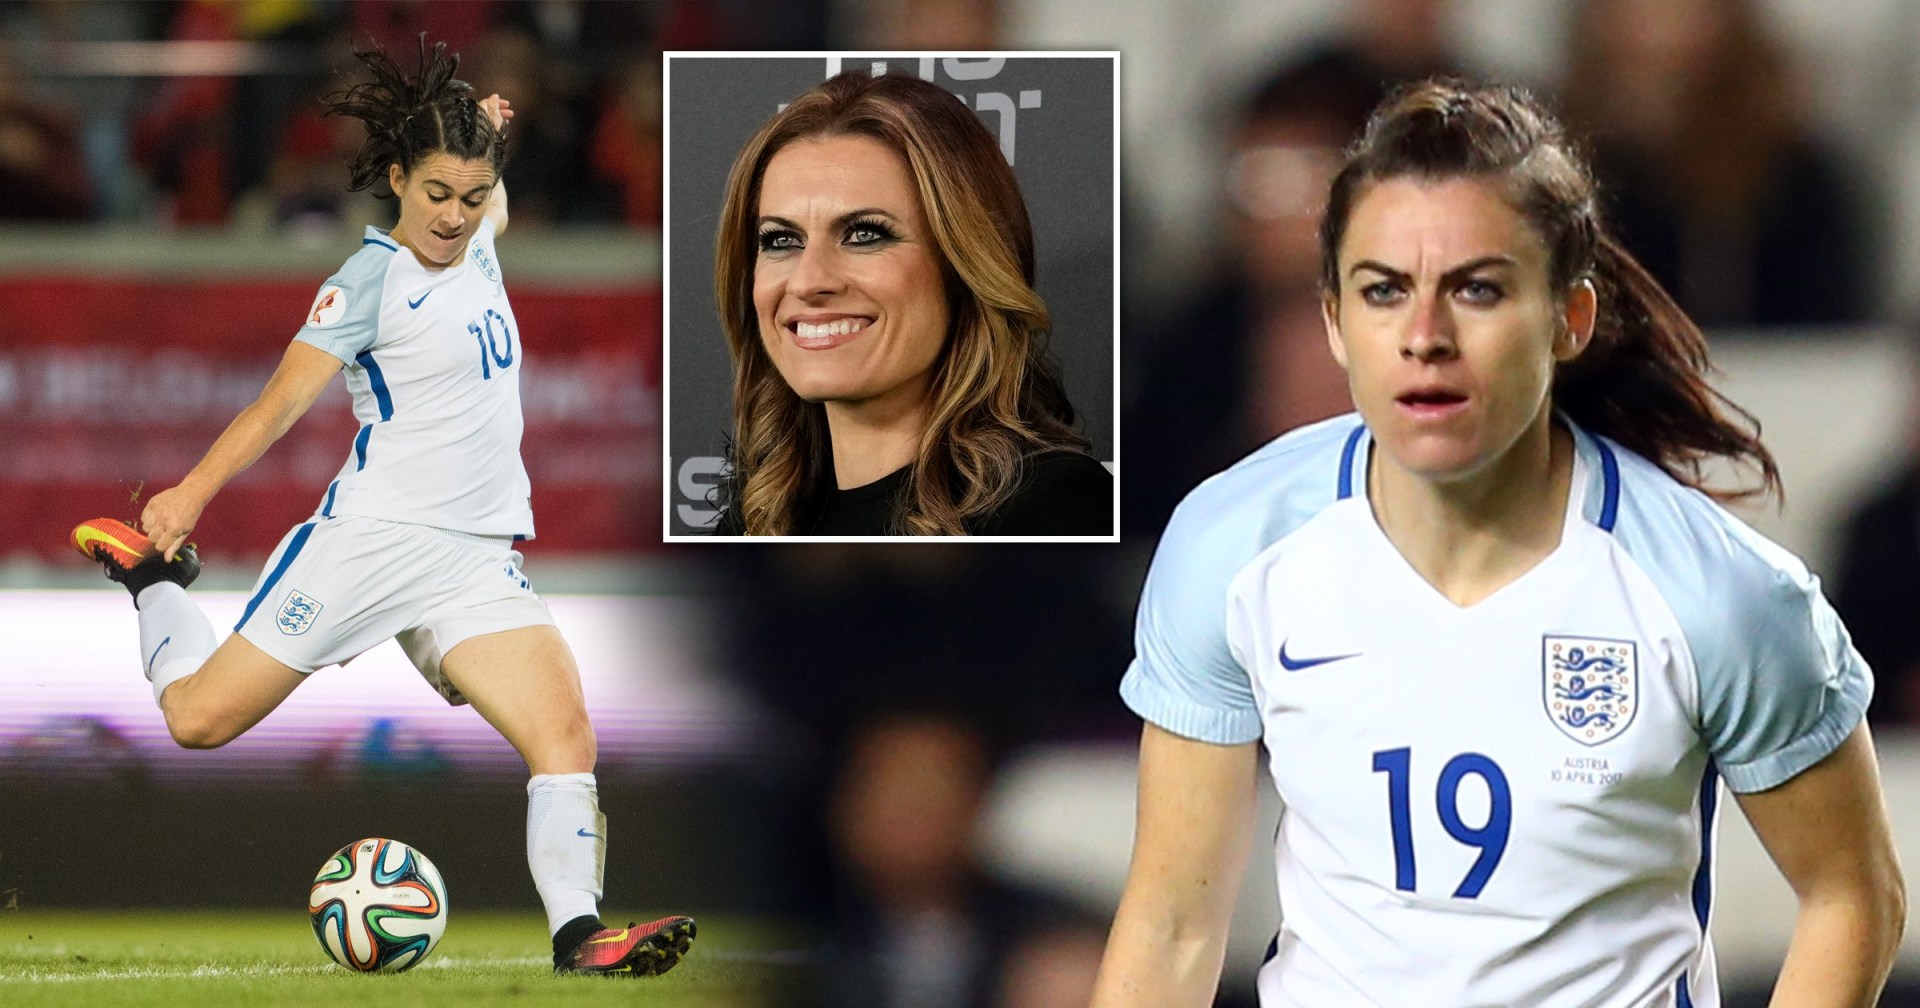 'i had massive period anxiety playing for the lionesses and worried about leaking'